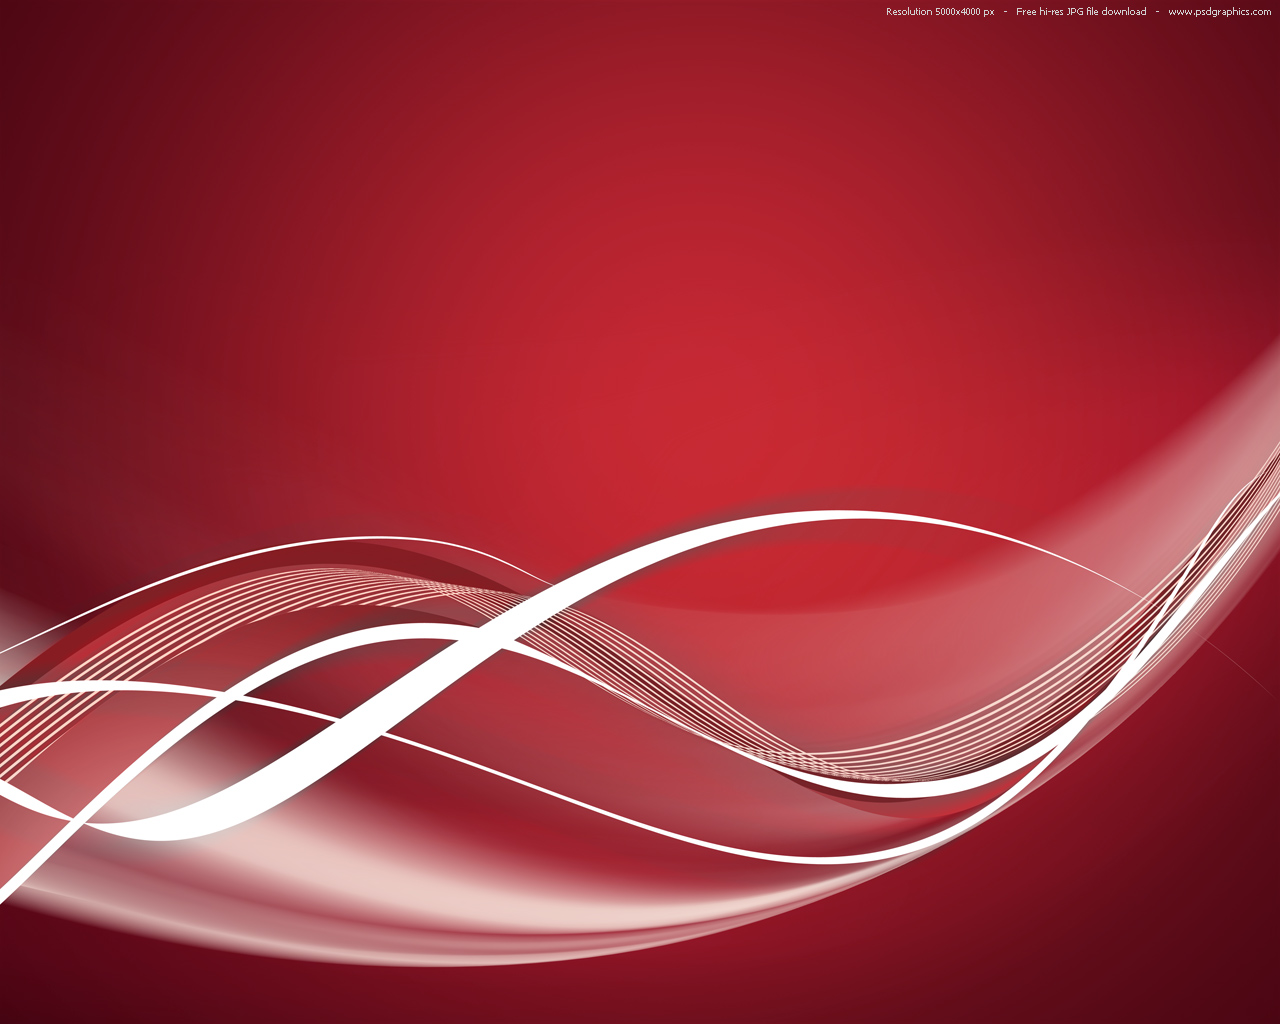 Red and White Graphic Designs